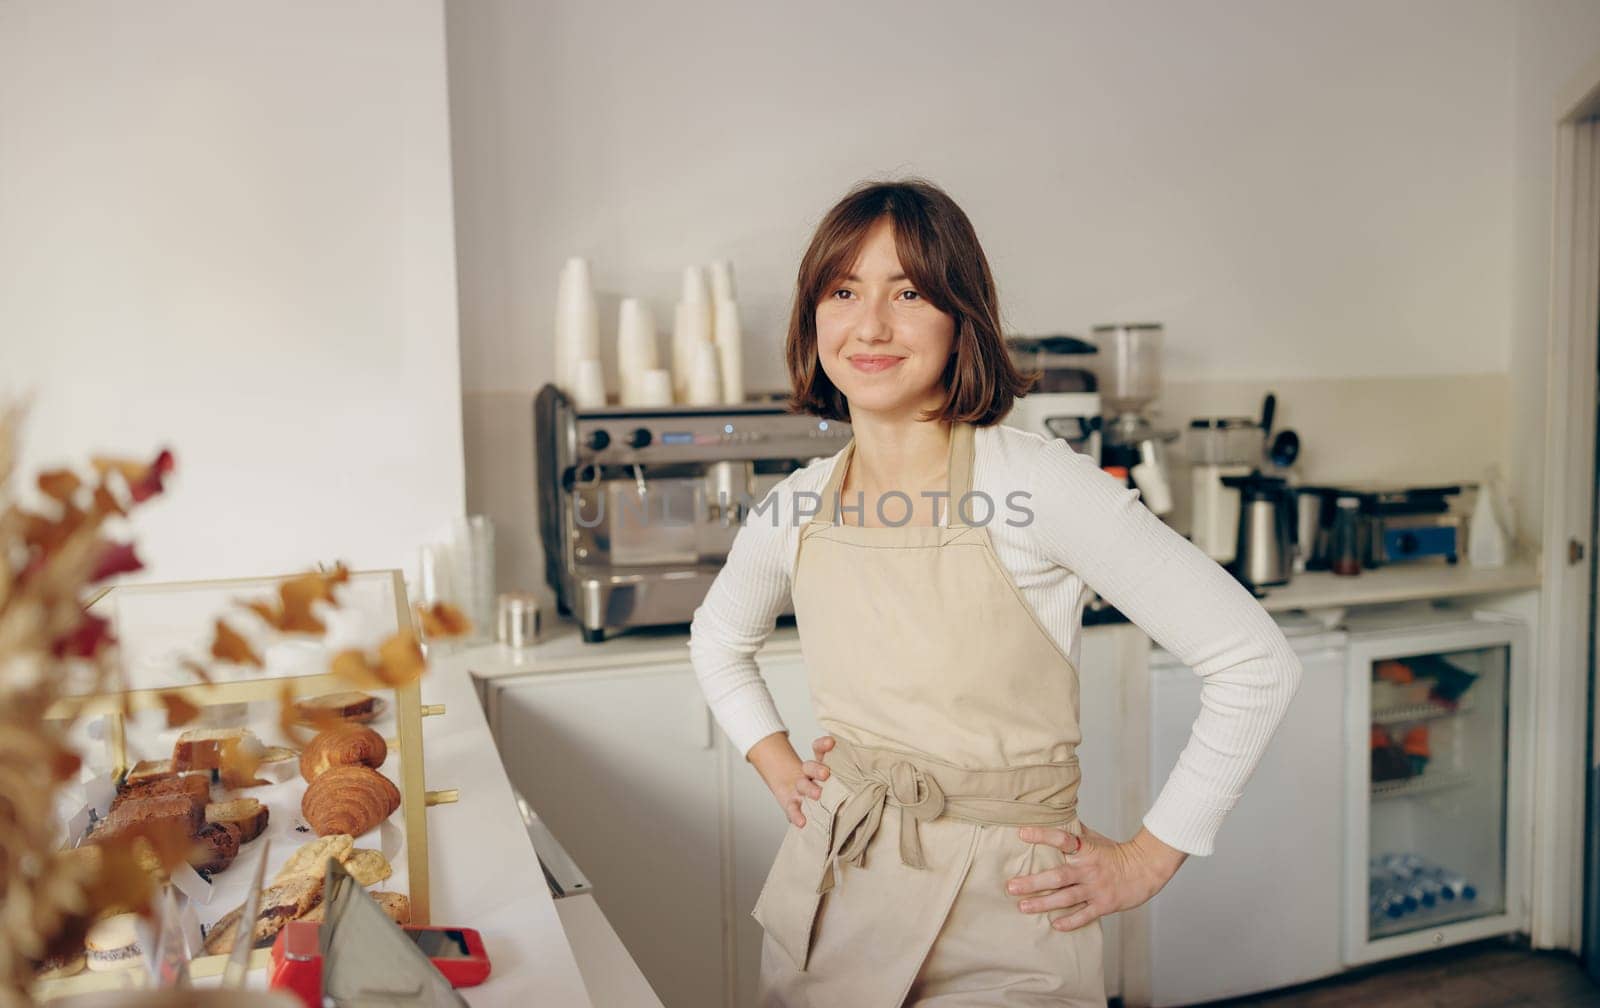 Portrait of a happy female barista standing behind the counter in a coffee shop